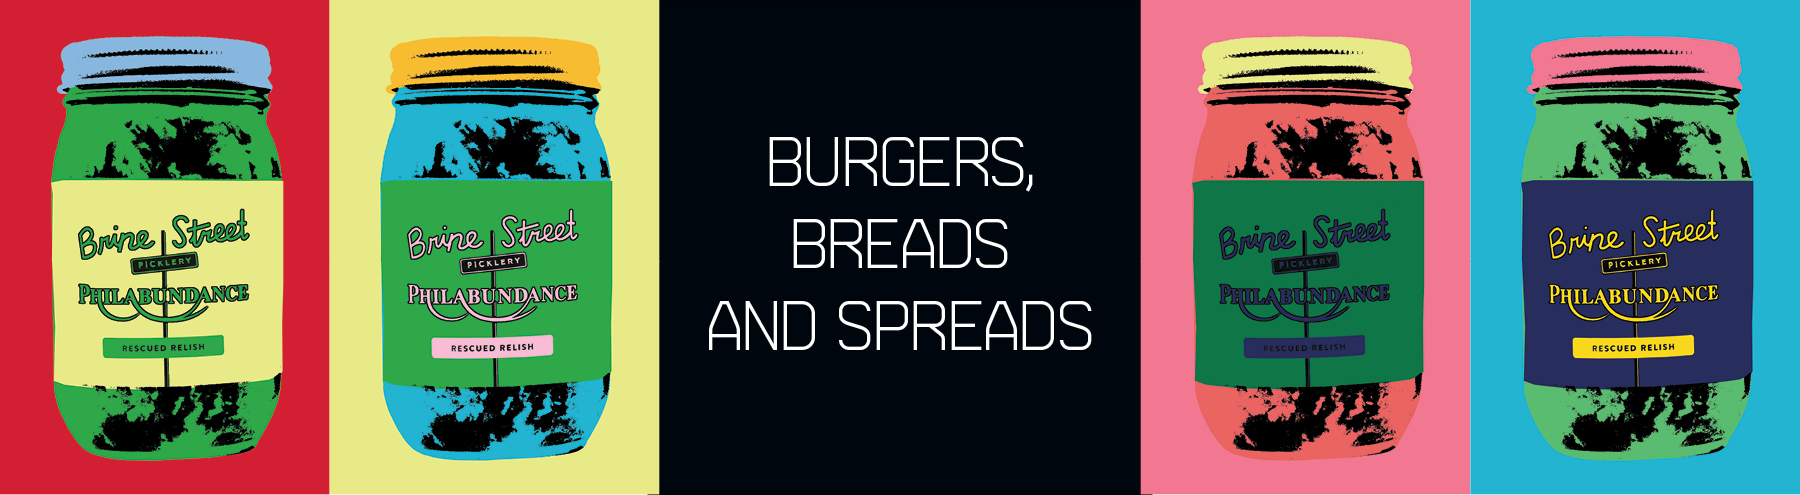 Burgers, Breads and Spreads